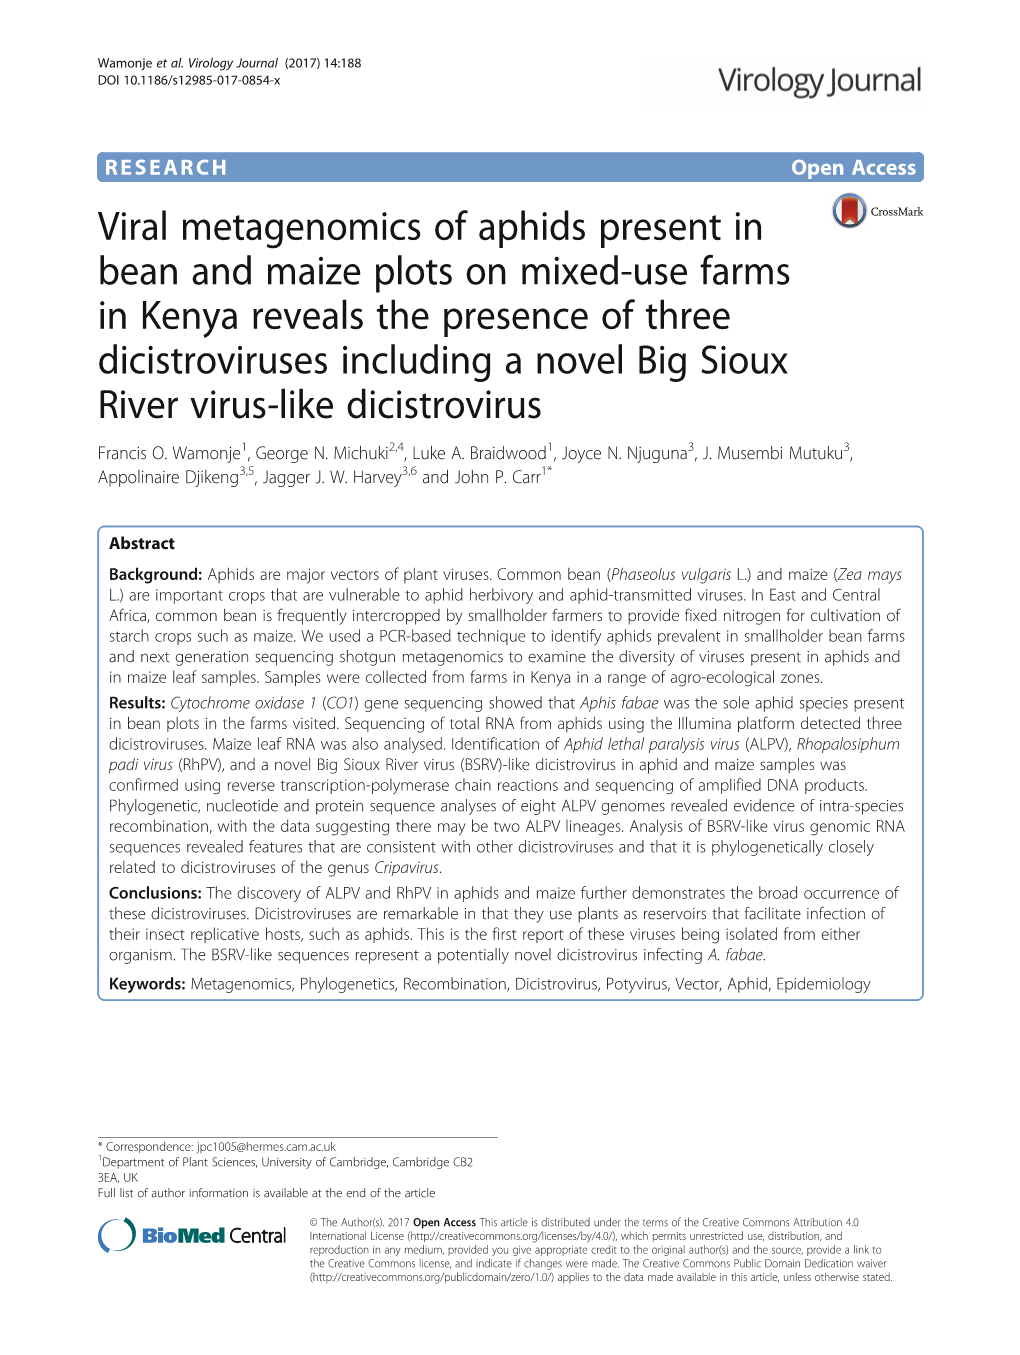 Viral Metagenomics of Aphids Present in Bean and Maize Plots on Mixed